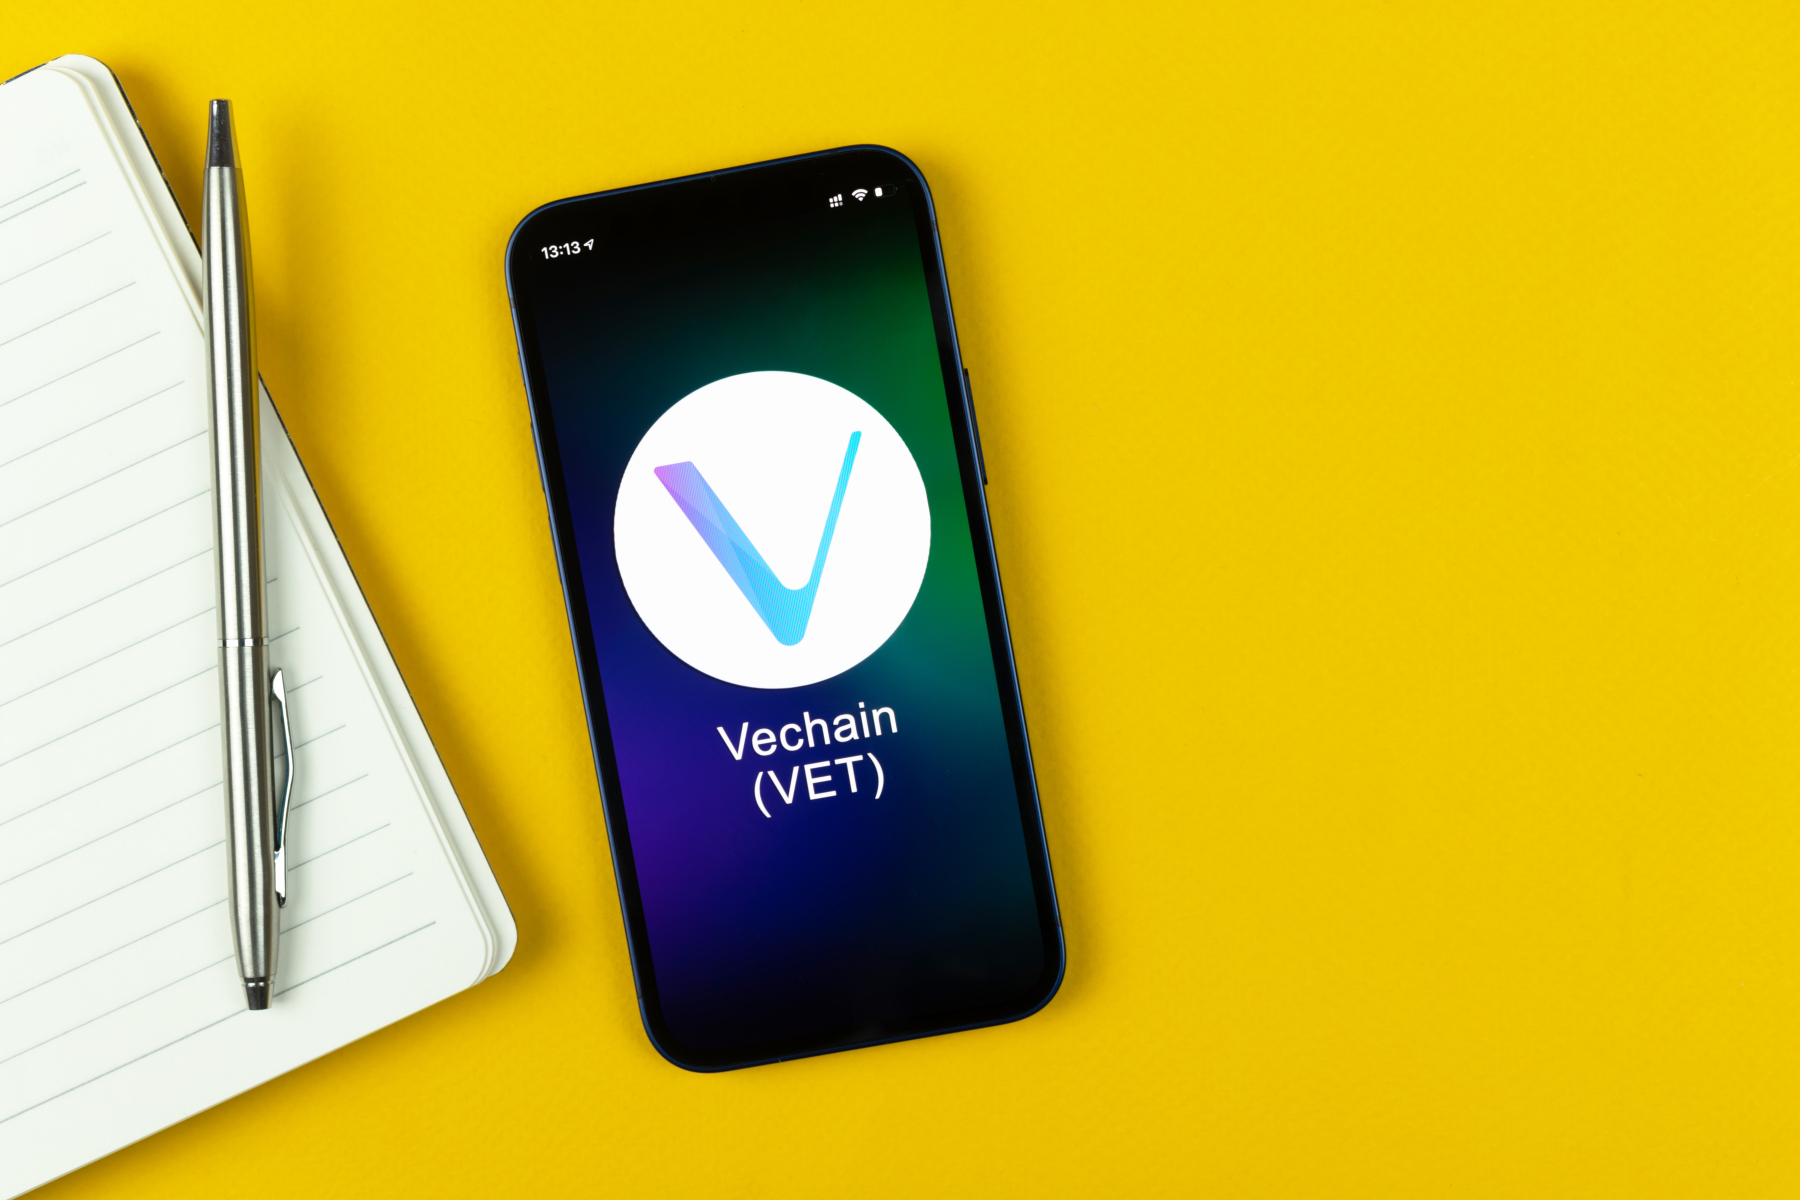 Price of VeChain (VET) could increase by more than 200%
